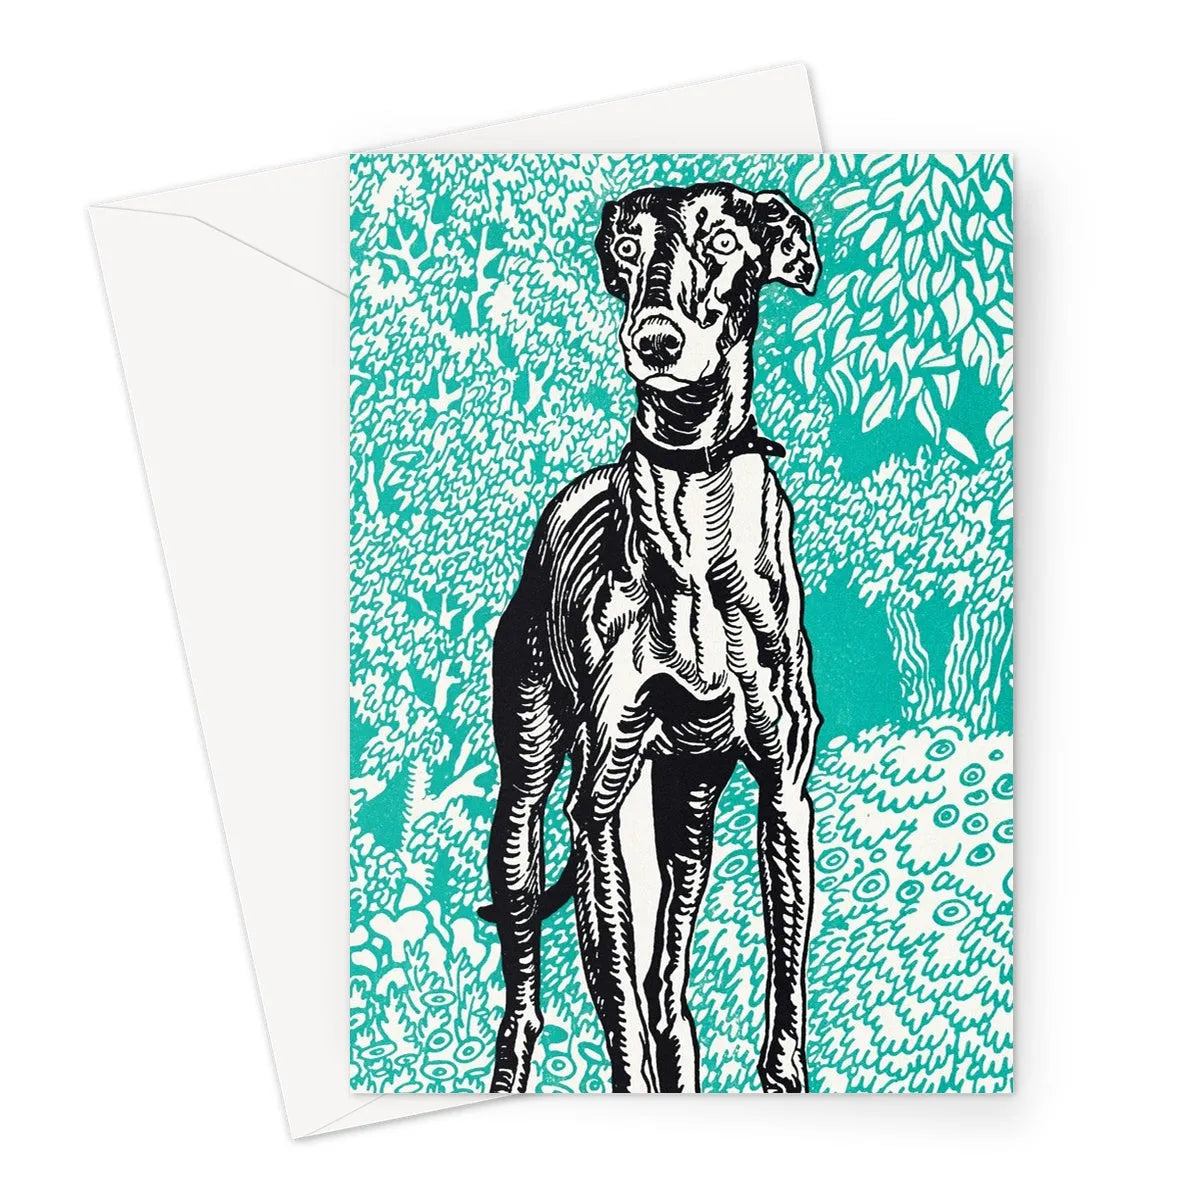 Greyhound By Moriz Jung Greeting Card - A5 Portrait / 1 Card - Notebooks & Notepads - Aesthetic Art